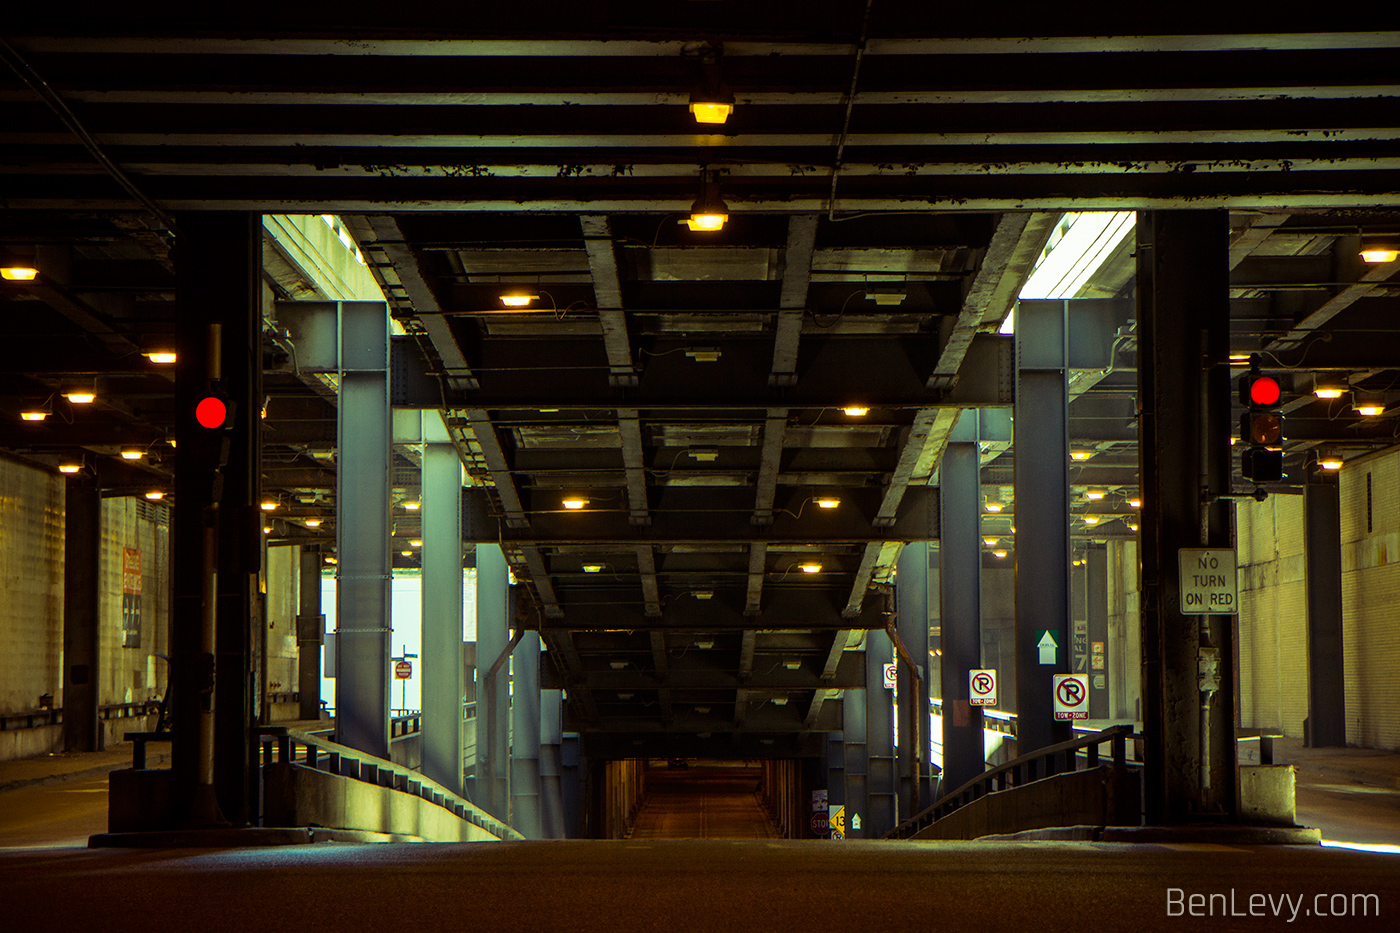 The lower level at East South Water Street